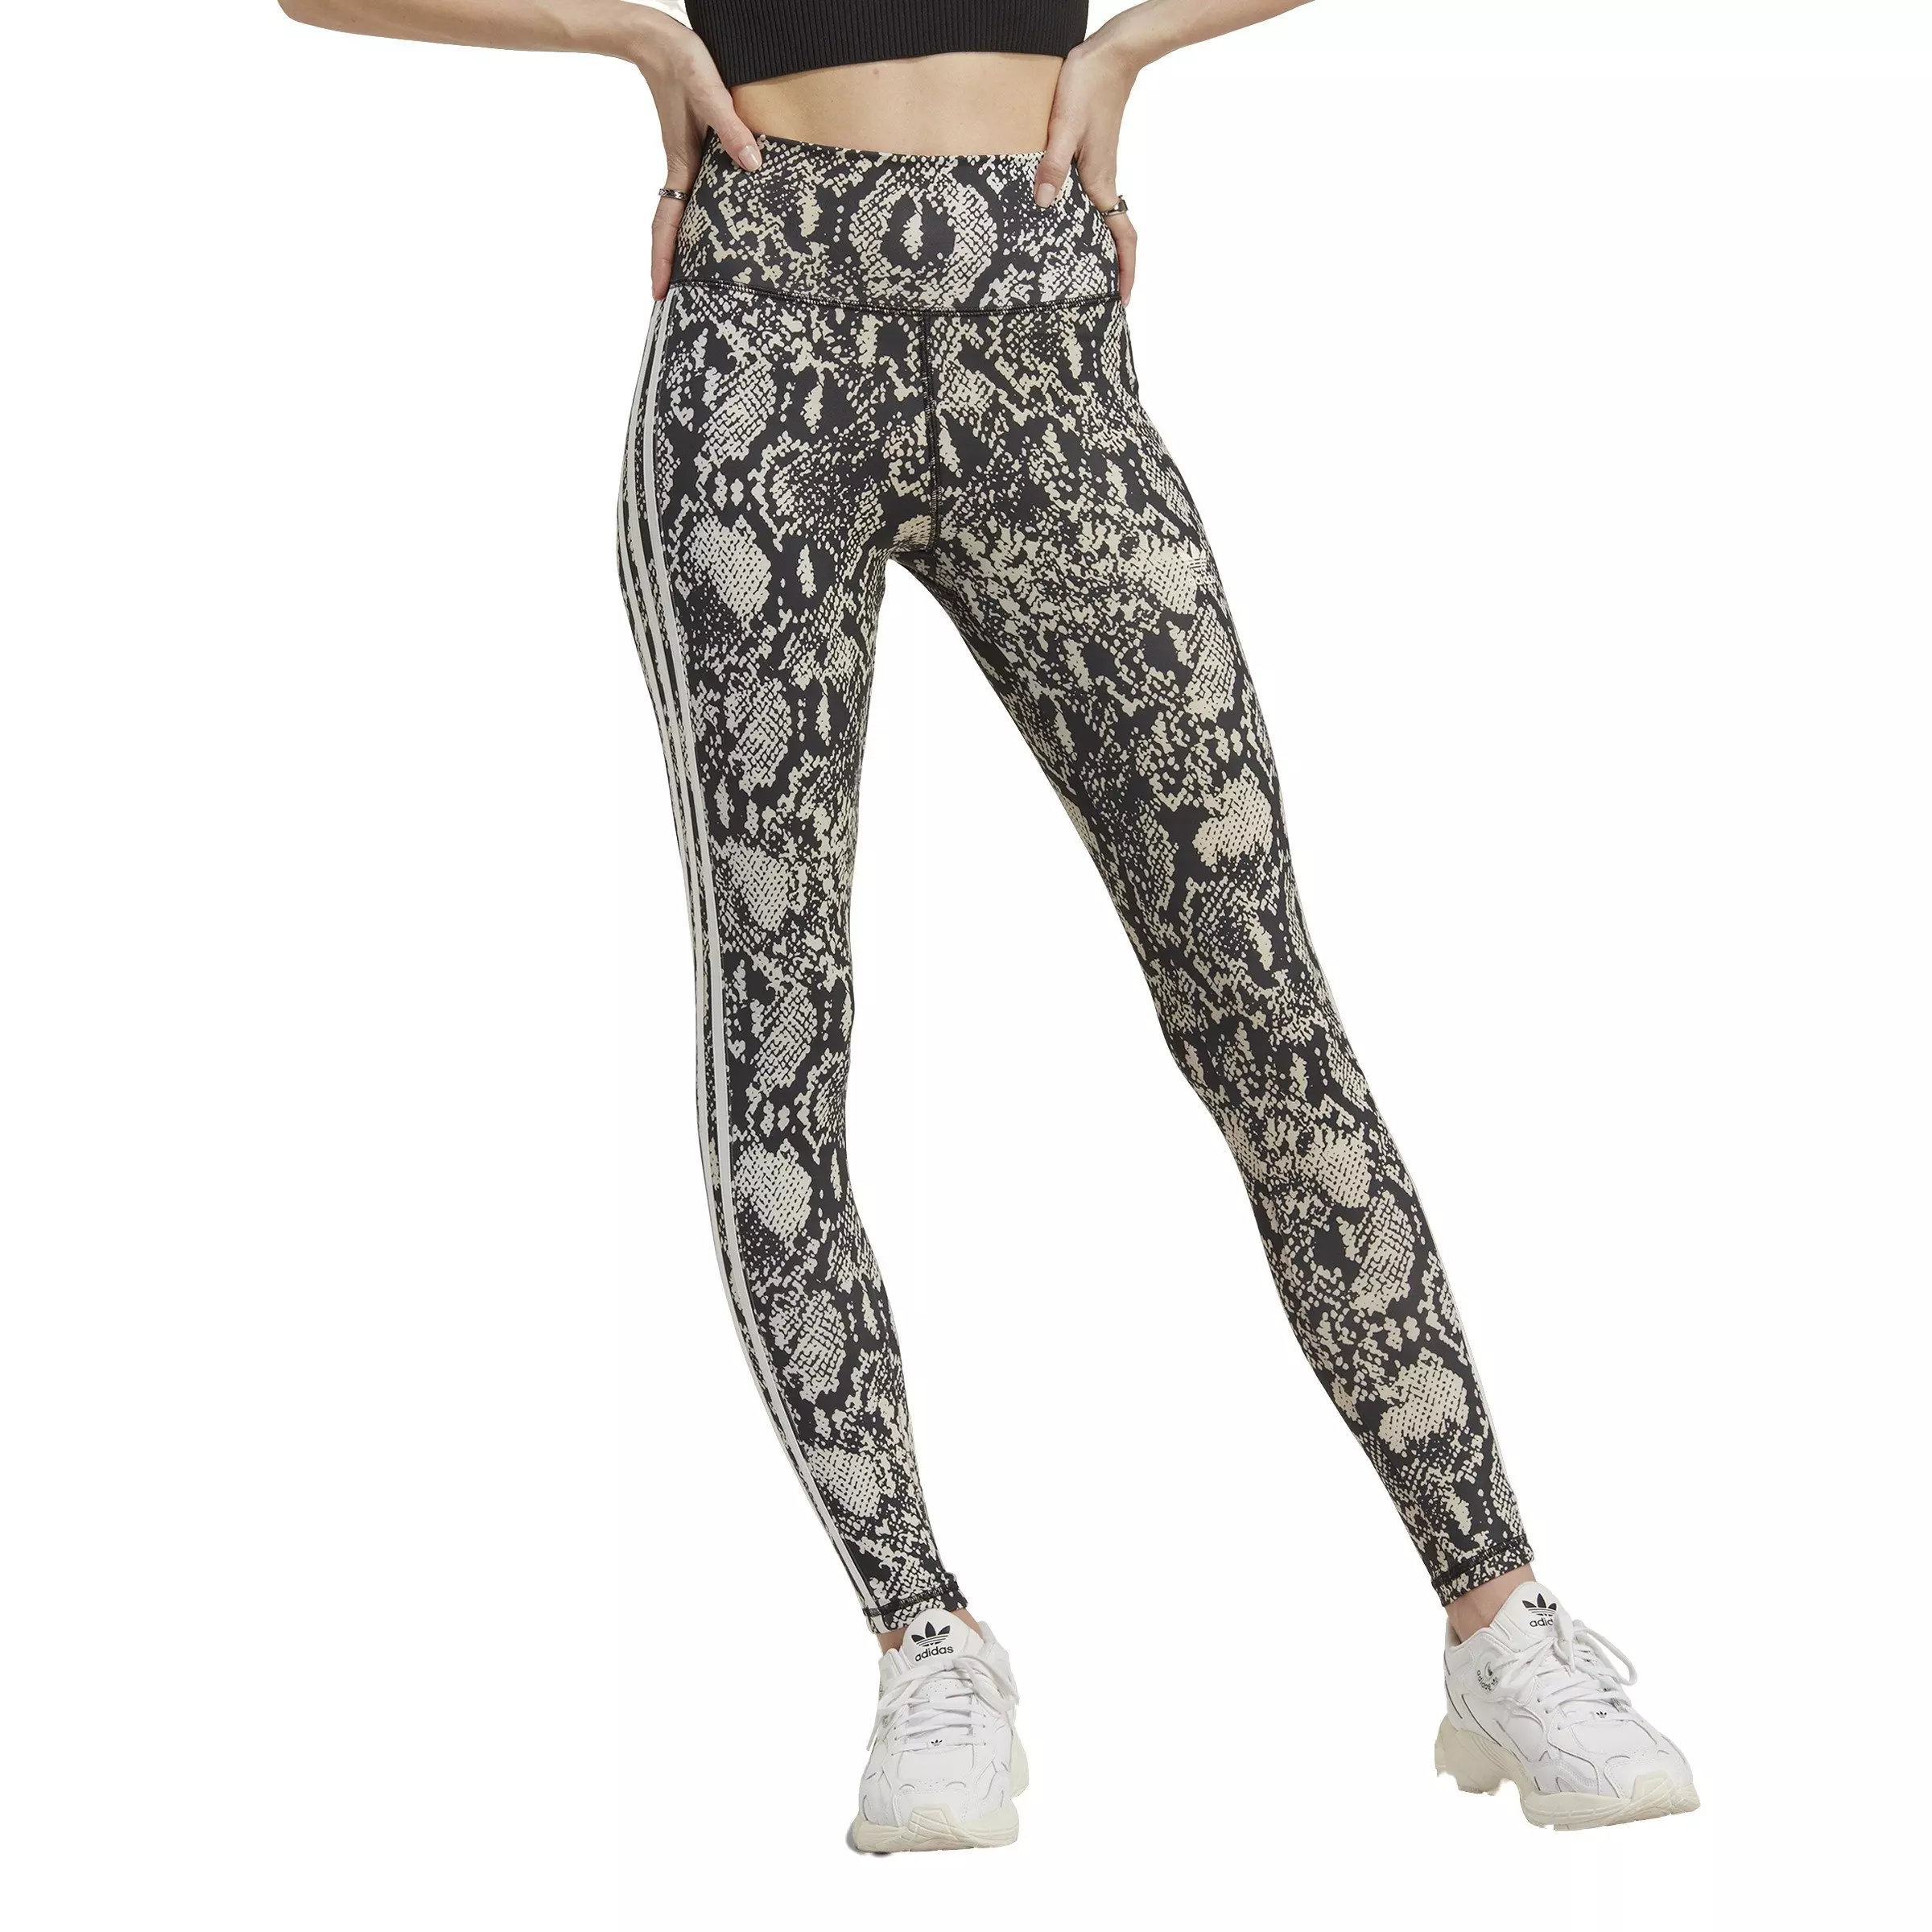 Slide View: 1: adidas Originals 3 Stripes Legging  Outfits with leggings,  Womens printed leggings, Sporty outfits